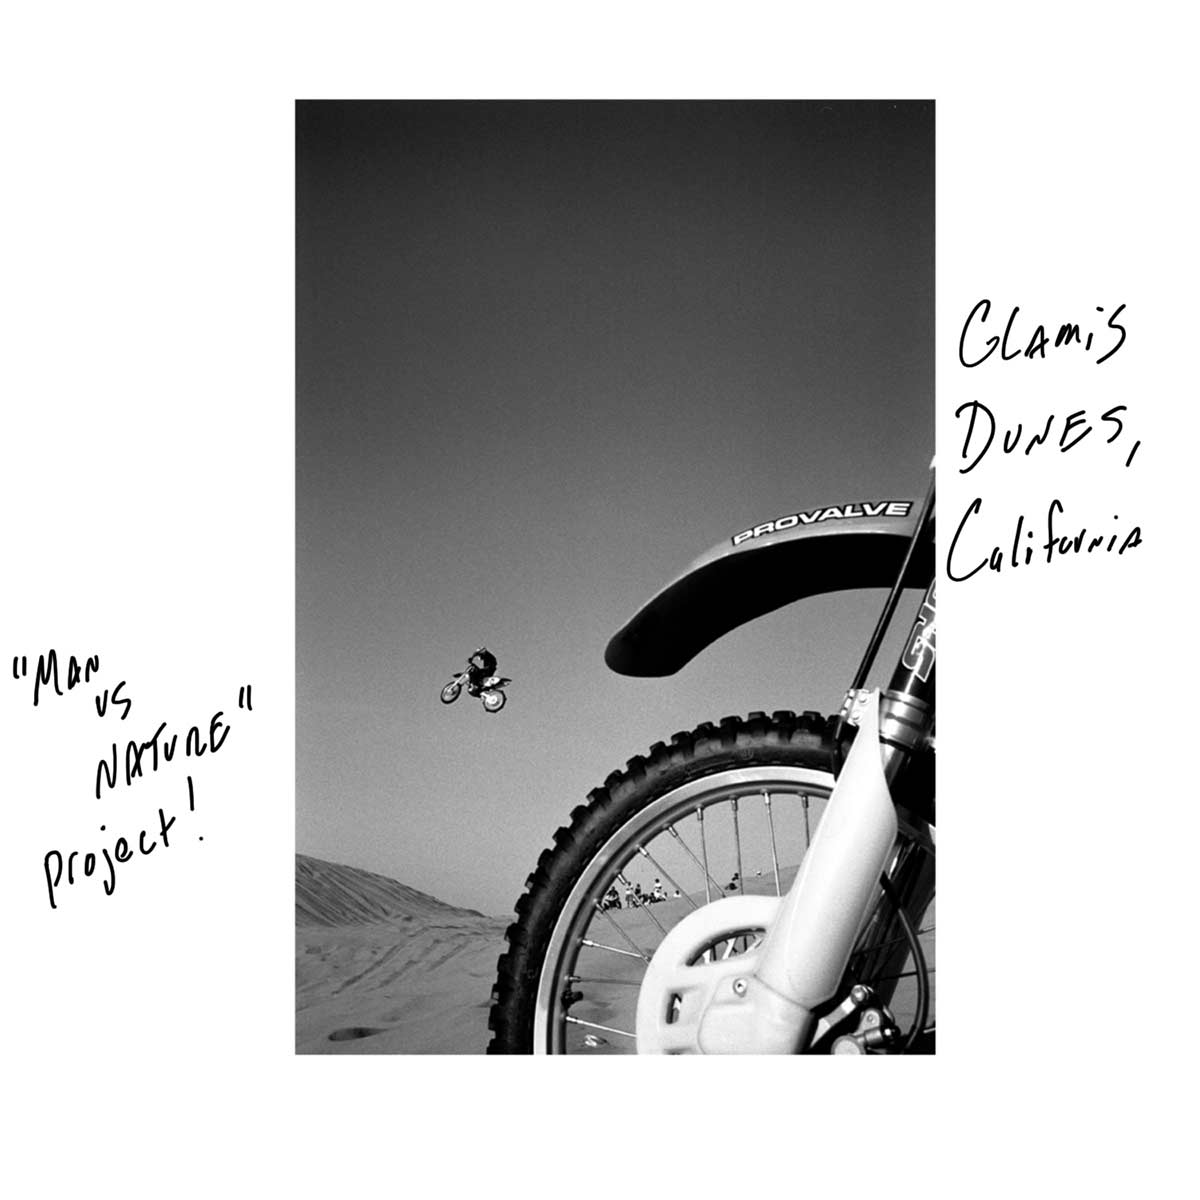 Notes on Photography, Glamis Dunes